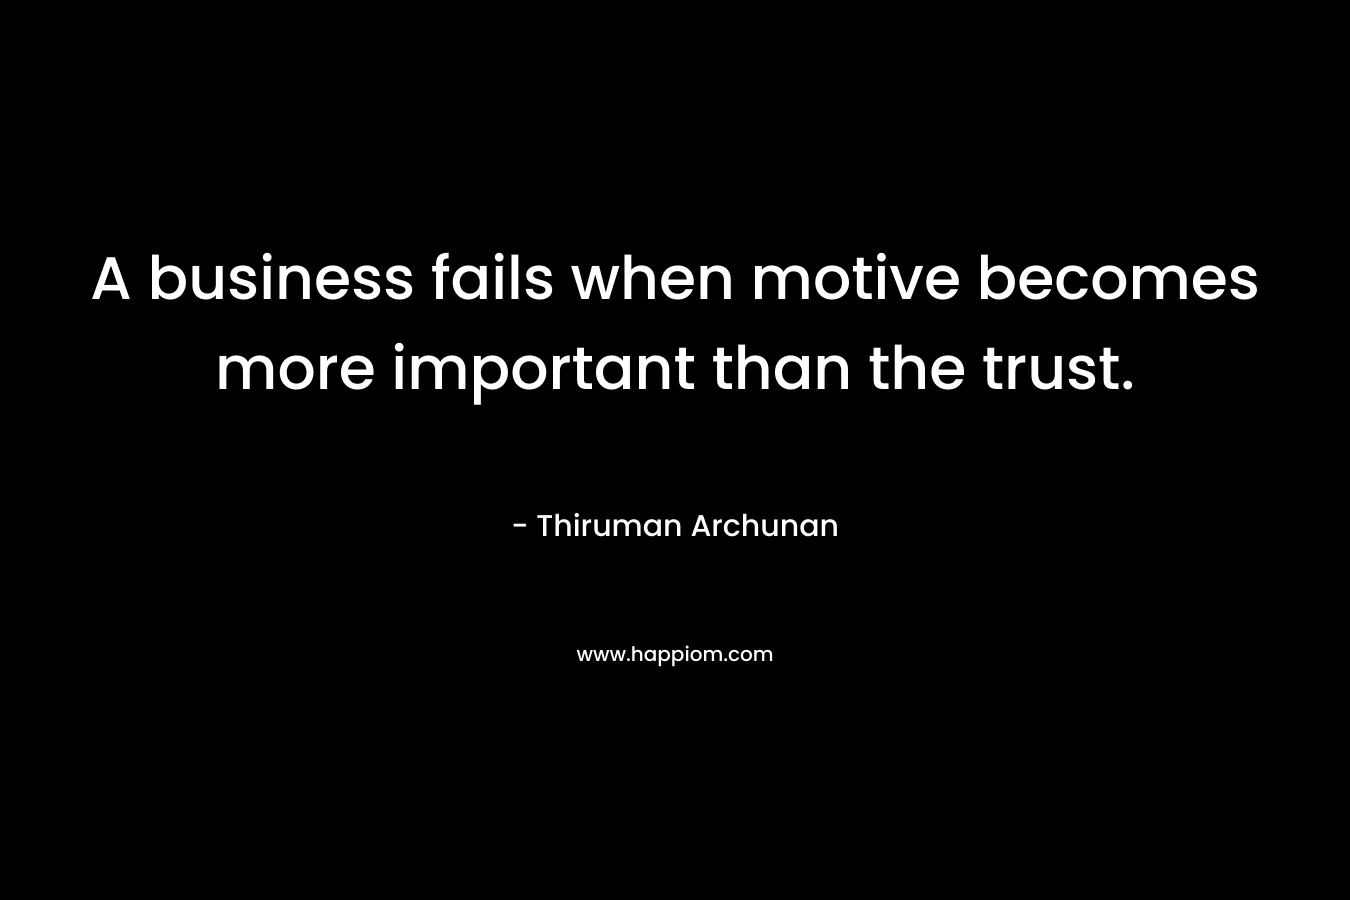 A business fails when motive becomes more important than the trust.